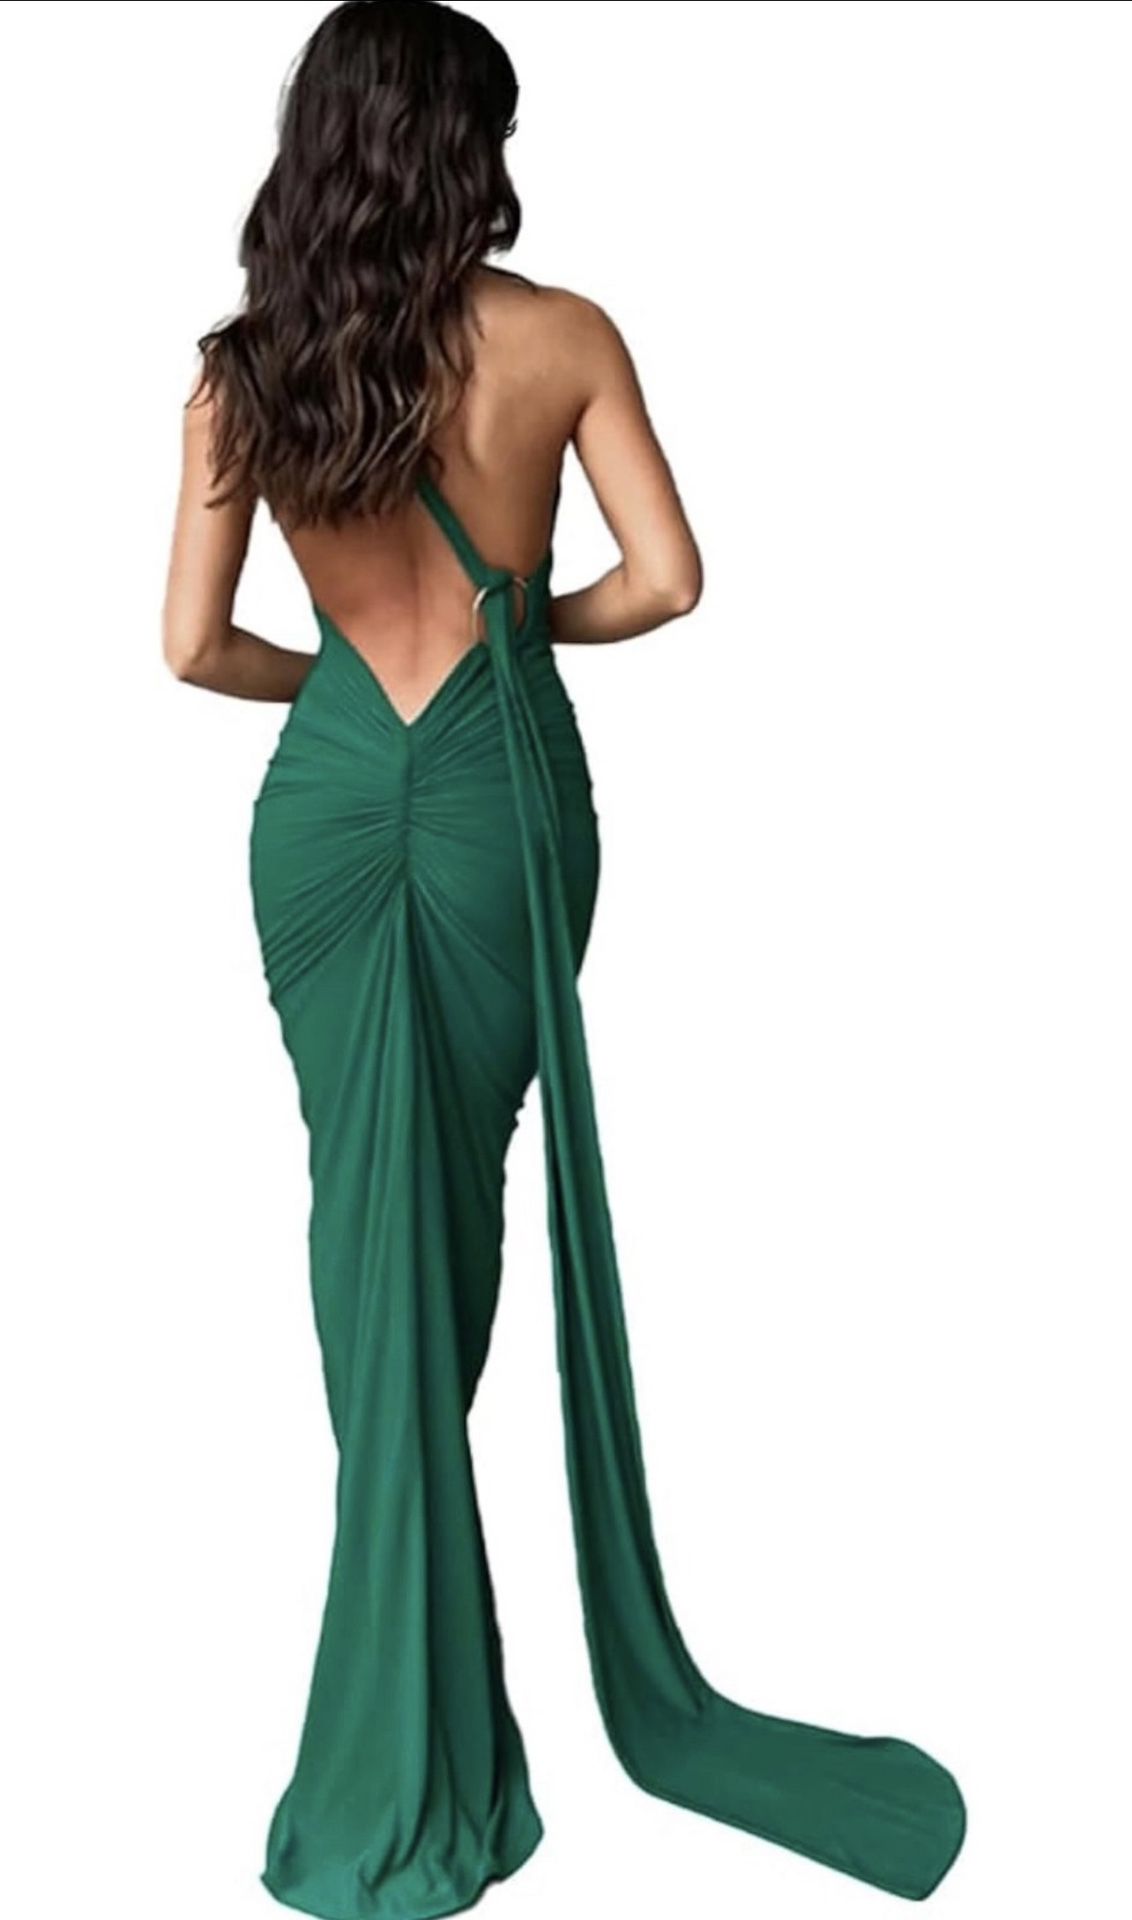 Women Sexy Backless Dress Bodycon Sleeveless Open Back Maxi Dress Going Out Elegant Party Cocktail Long Dress Size S Fabric type 100% Polyester MATERI